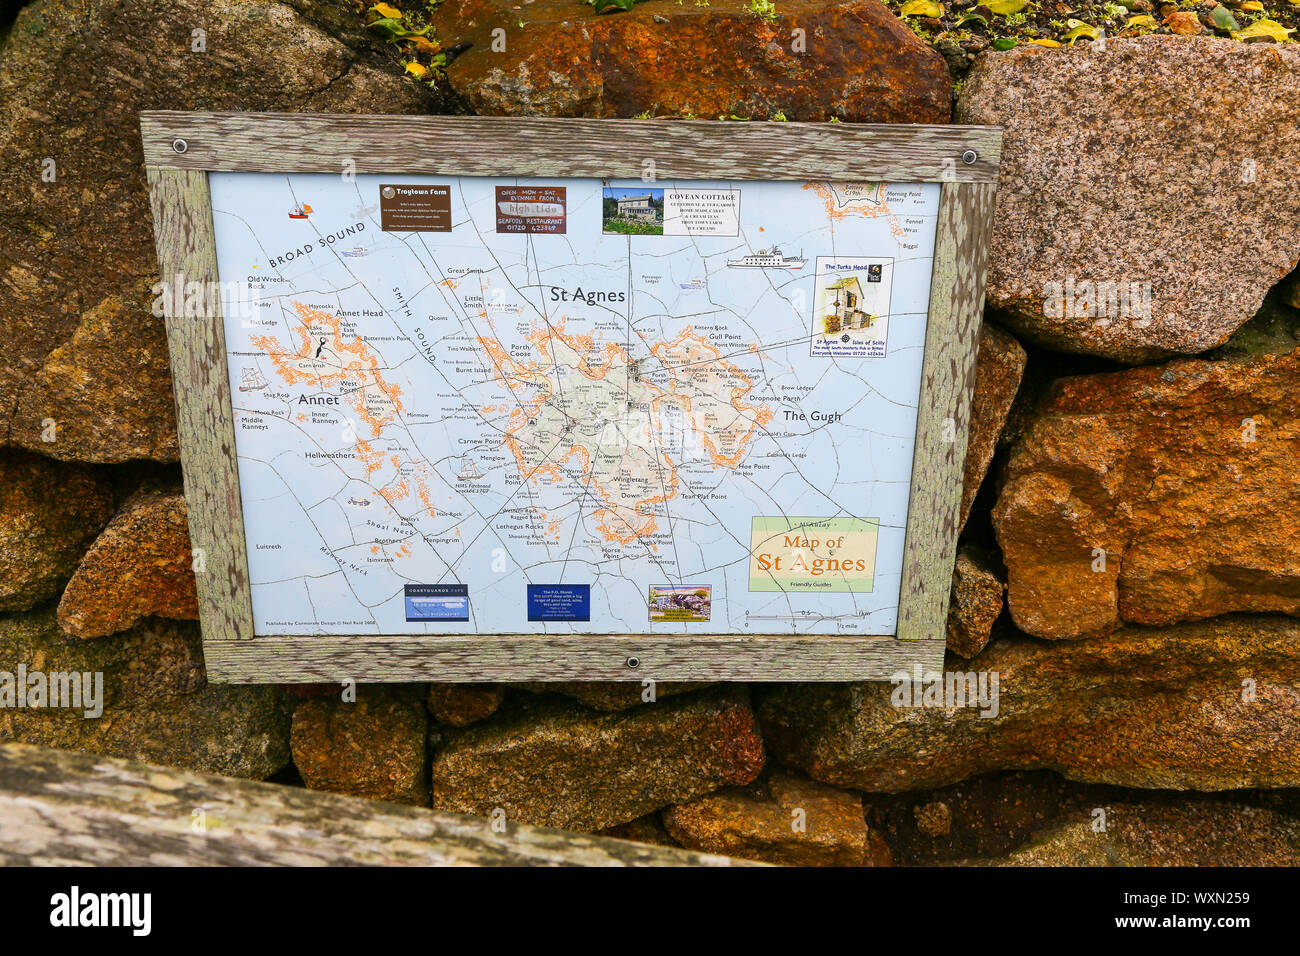 A tourist map of St. Agnes Island, Isles of Scilly, Cornwall, England, UK Stock Photo